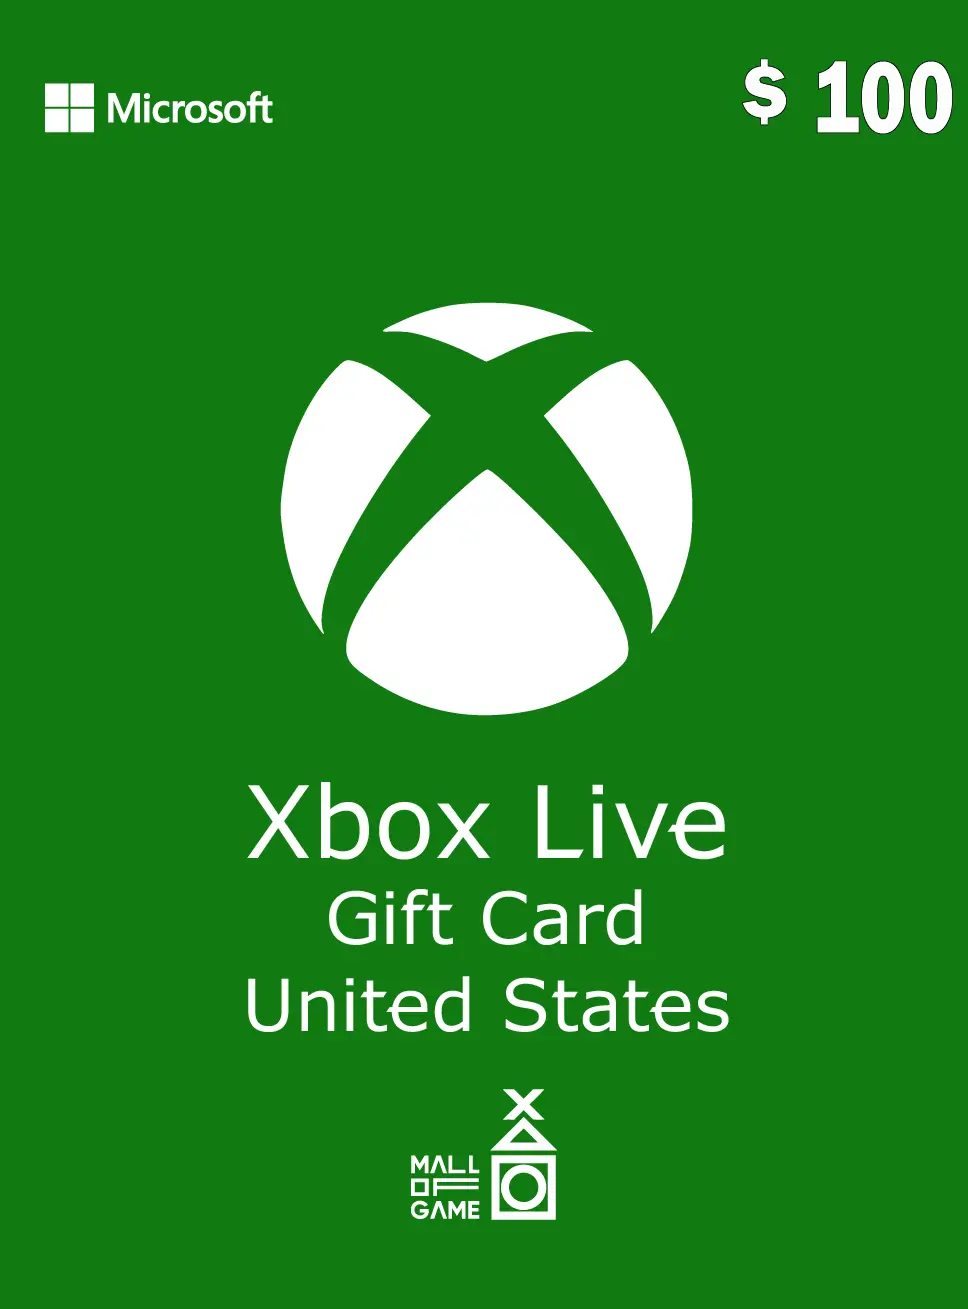 Xbox Live Gift Card - US$ 100